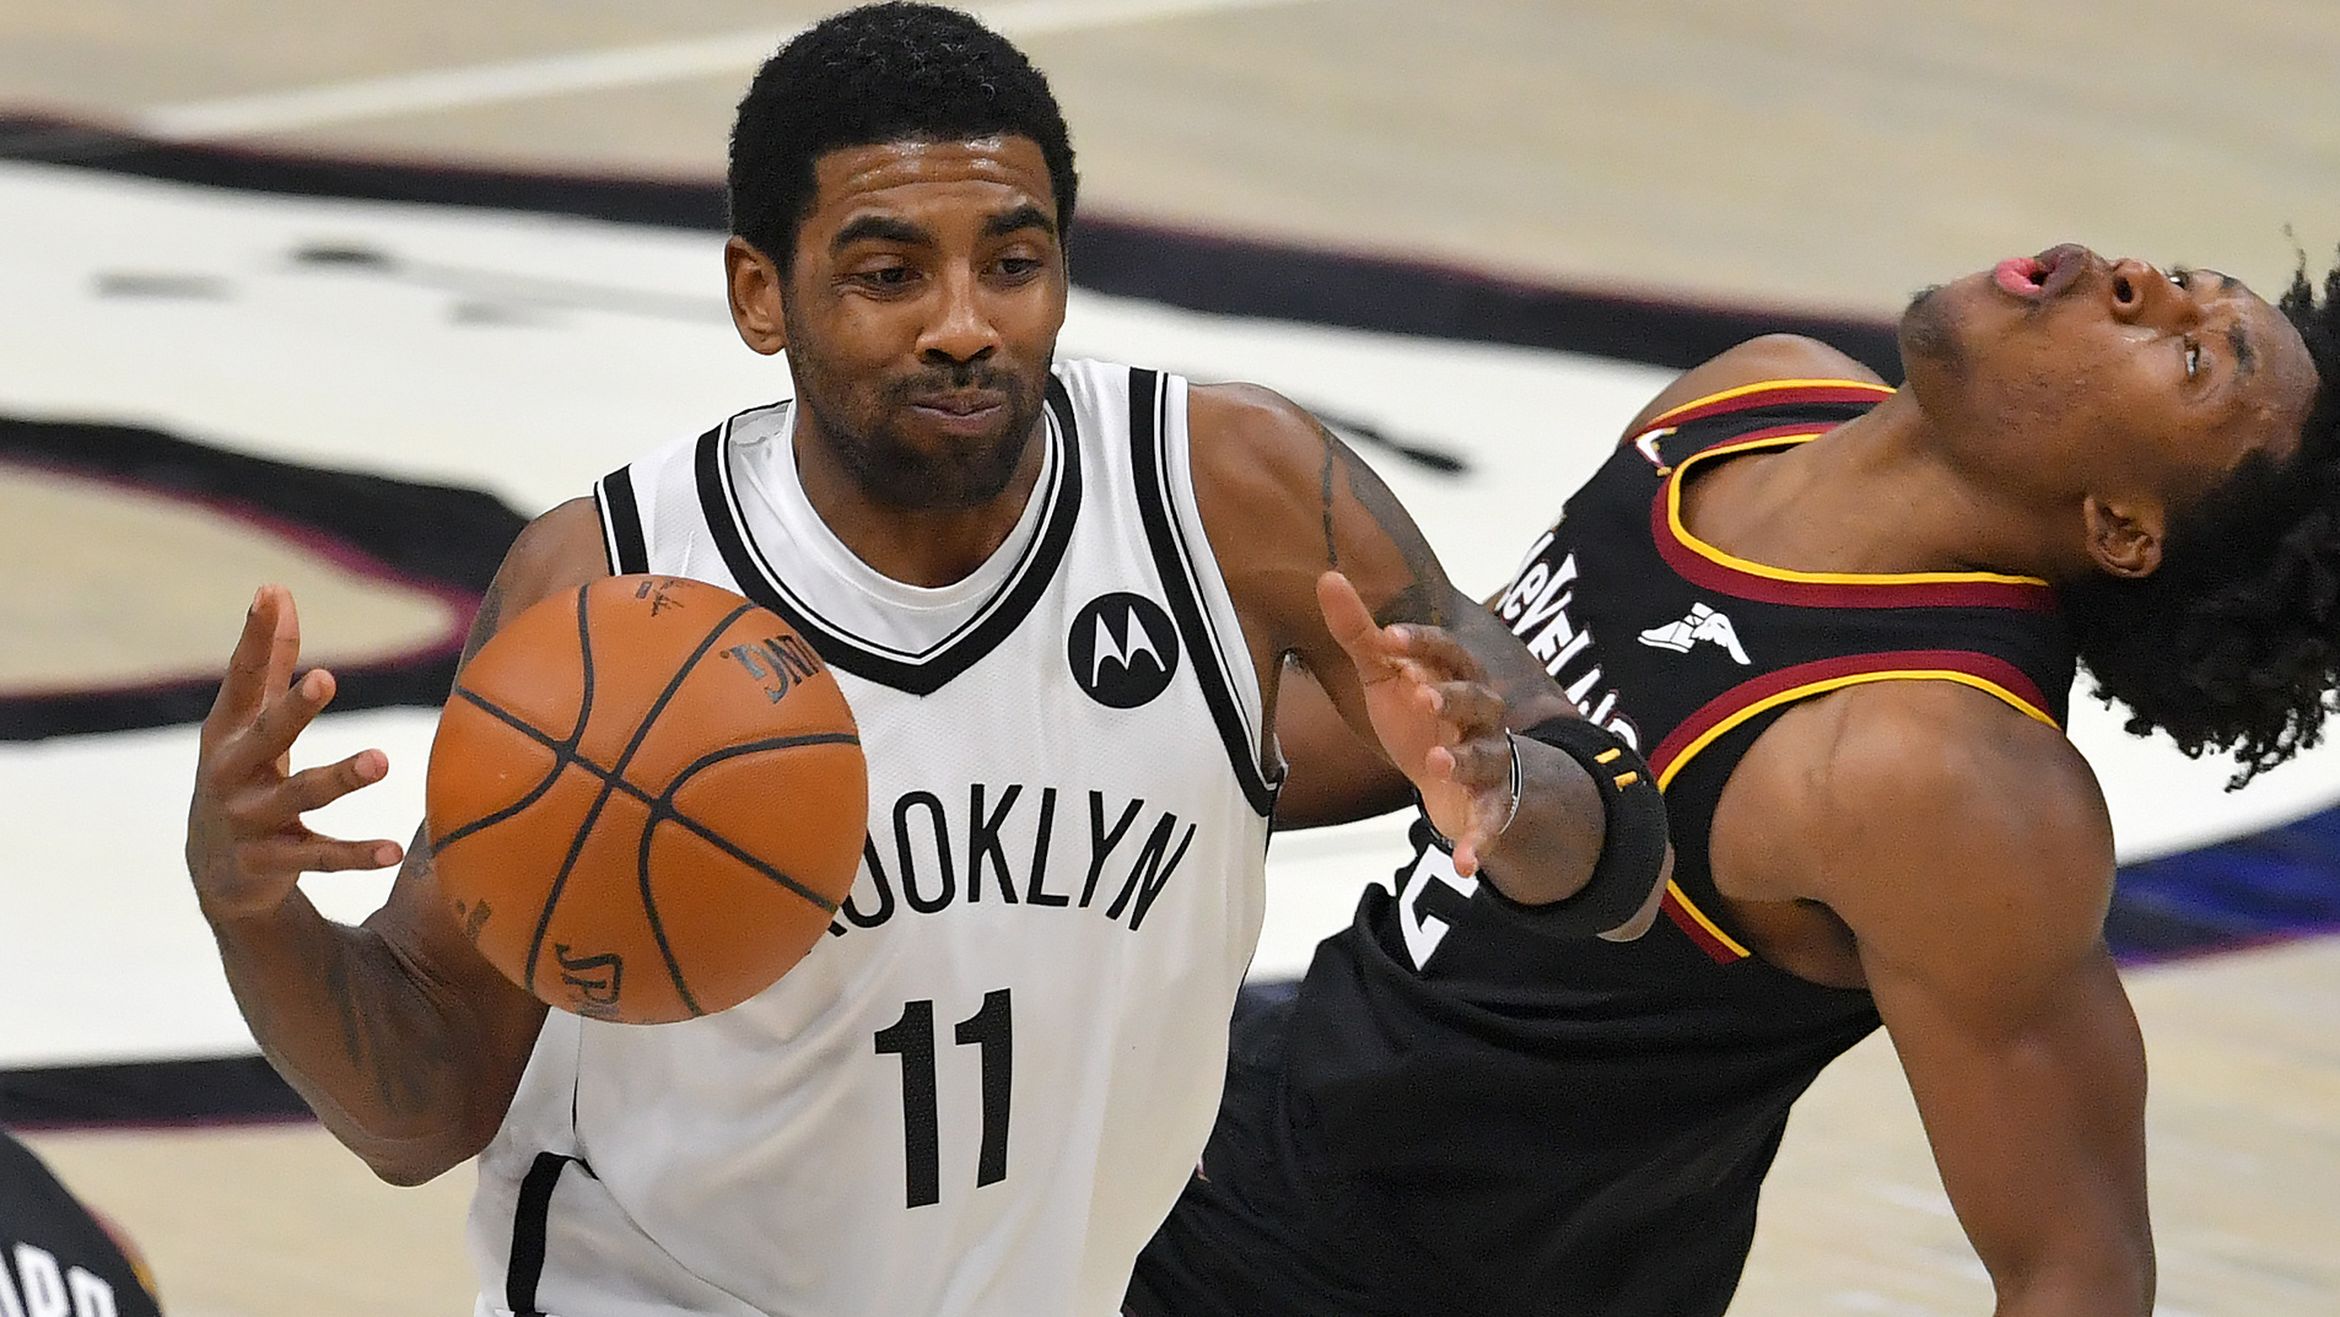 Kyrie Irving of the Brooklyn Nets runs into Collin Sexton of the Cleveland Cavaliers.